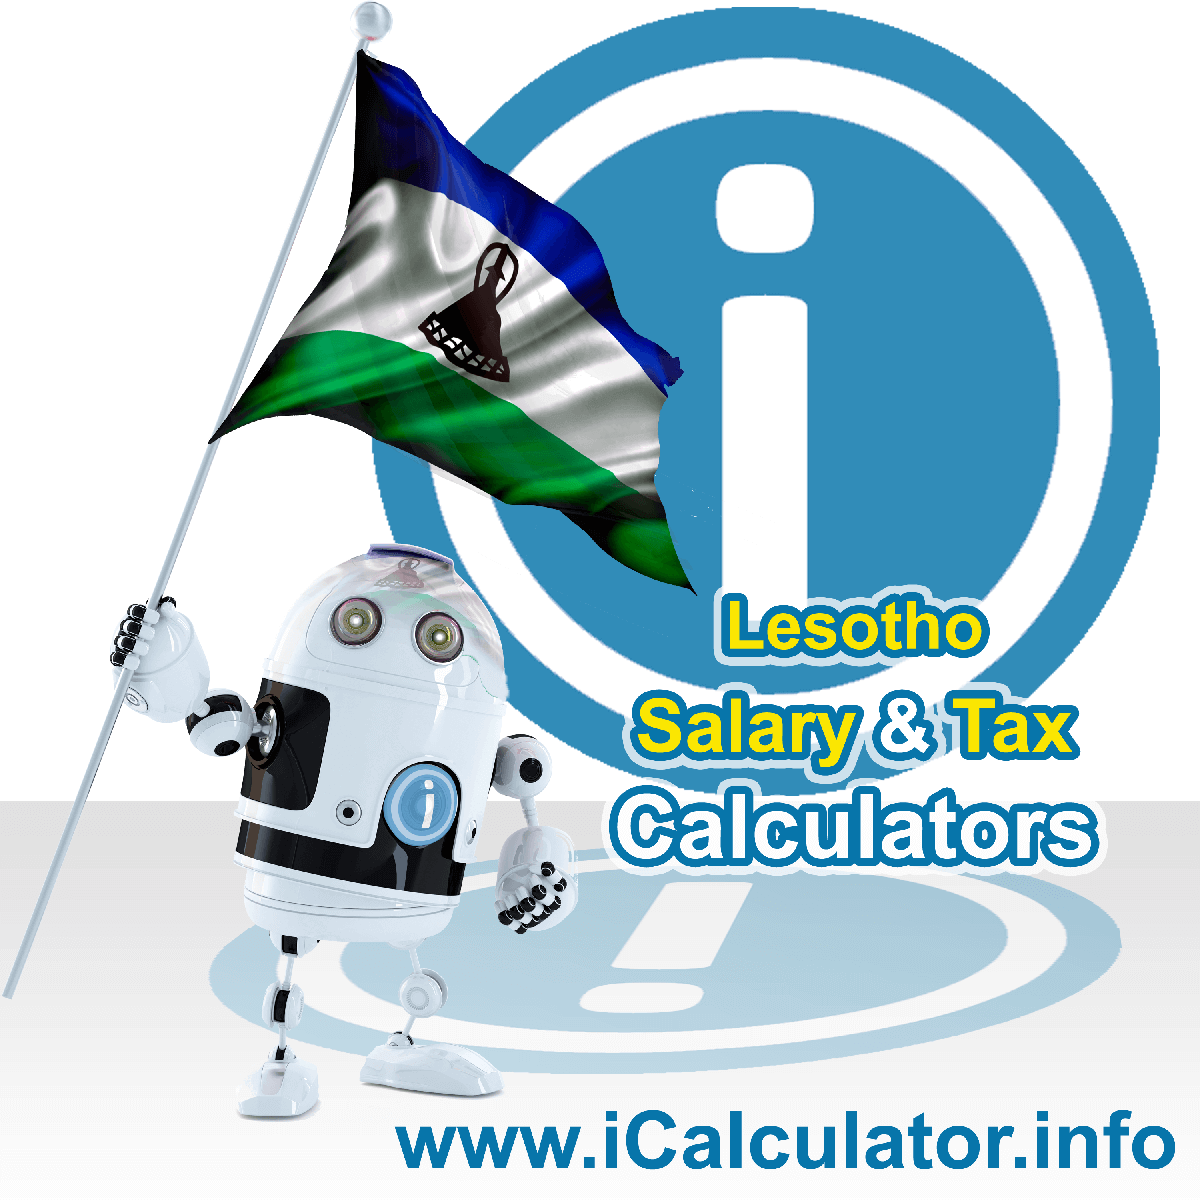 Lesotho Salary Calculator. This image shows the Lesothoese flag and information relating to the tax formula for the Lesotho Tax Calculator